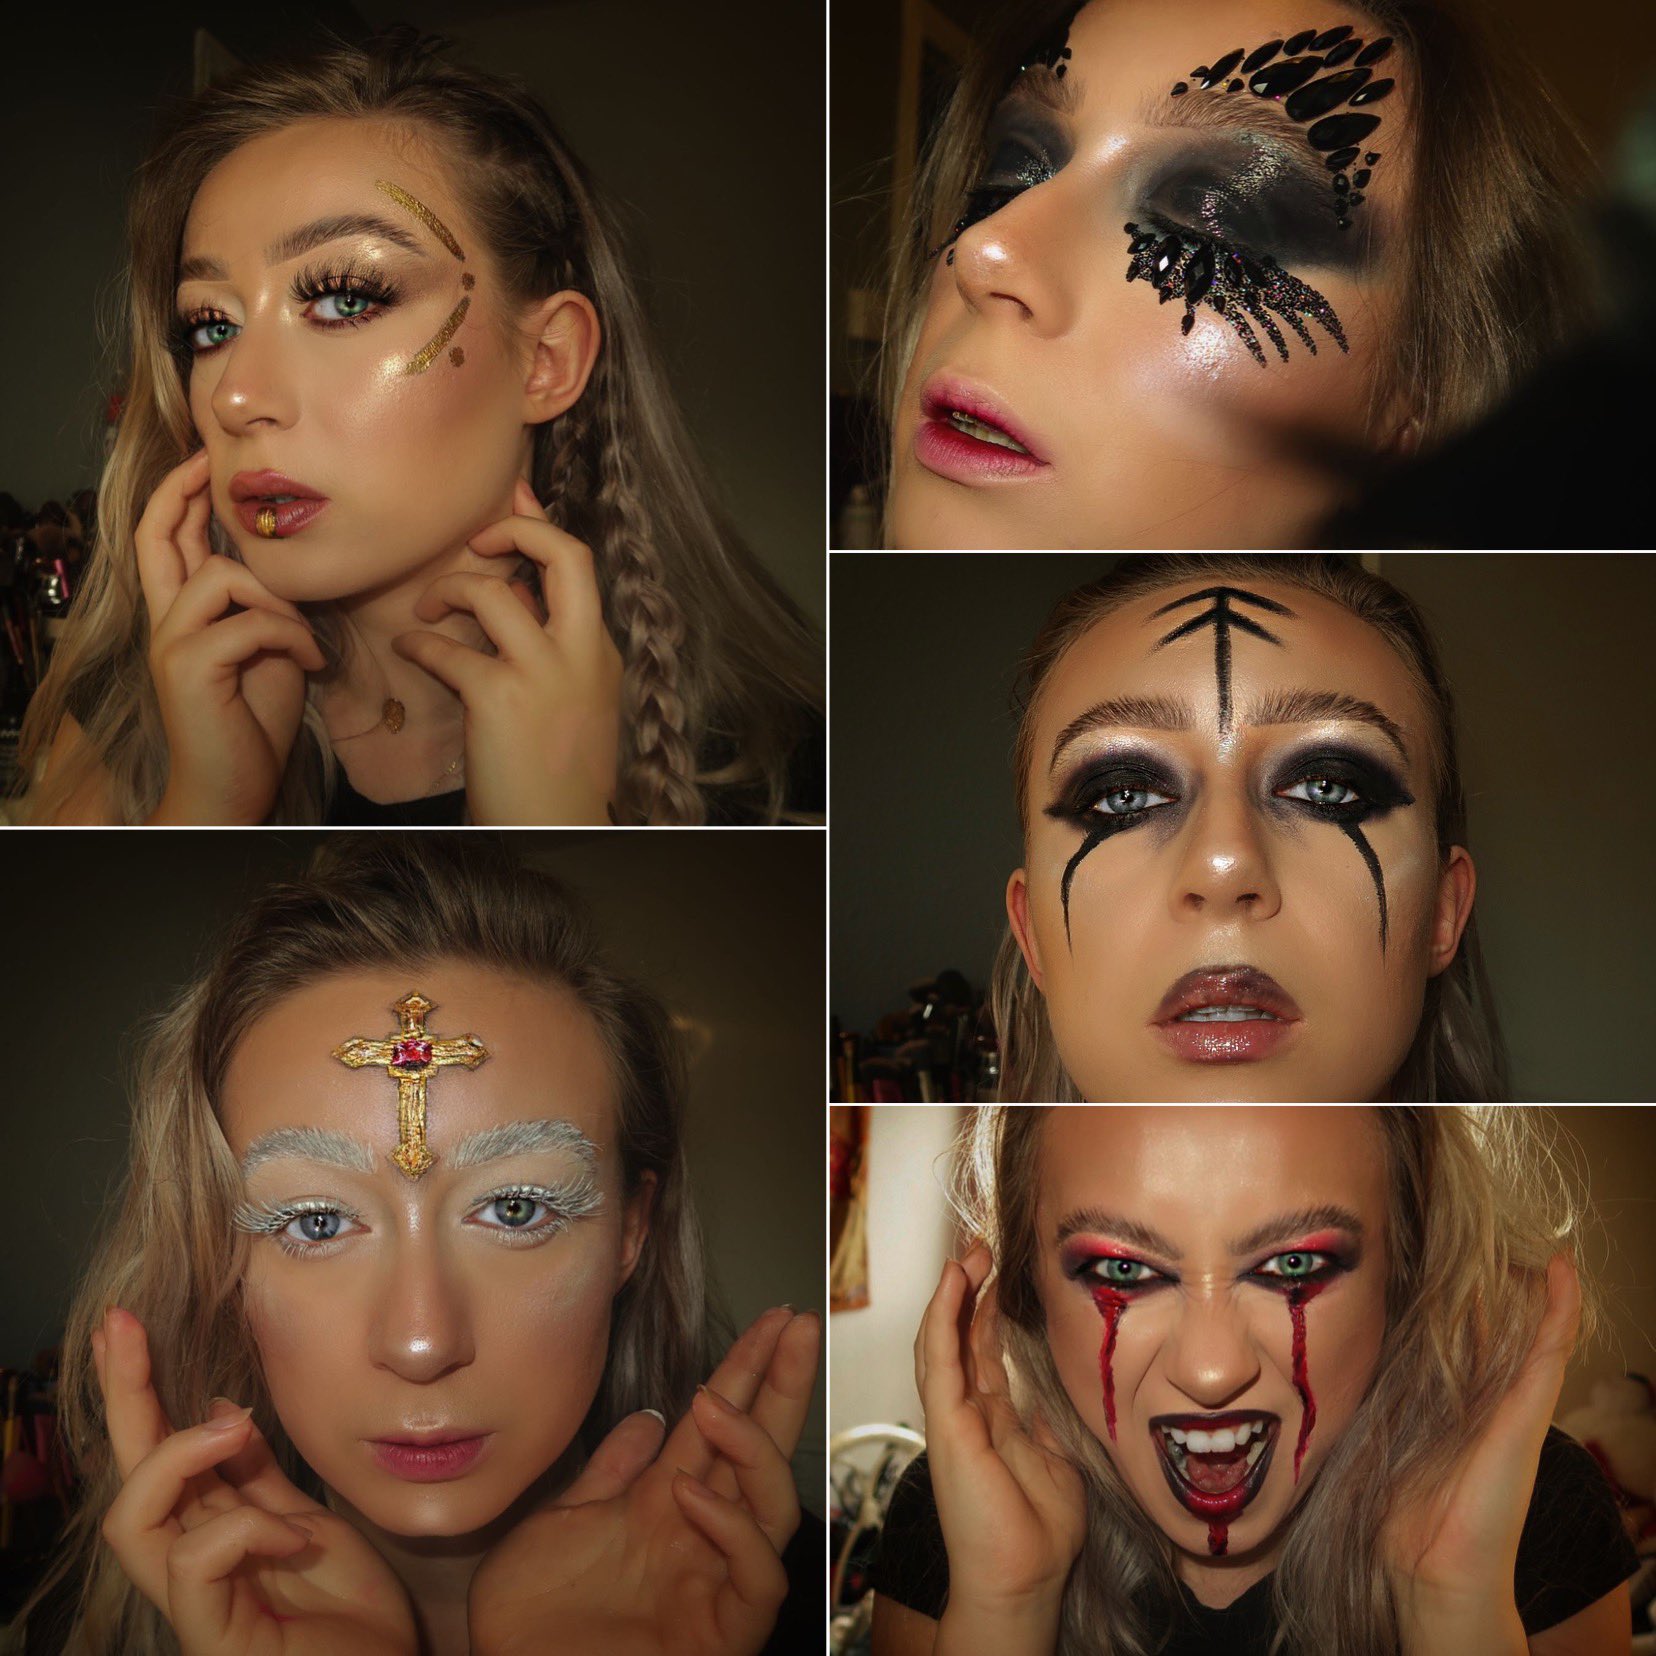 fleksibel bælte Ideelt 𝒮𝒾𝒶𝓃 on Twitter: "I did a @HistoryVikings inspired makeup series on my  Instagram! Here are my favourite pics of the looks I created! Be sure to  follow my Instagram (@sianiza) to see